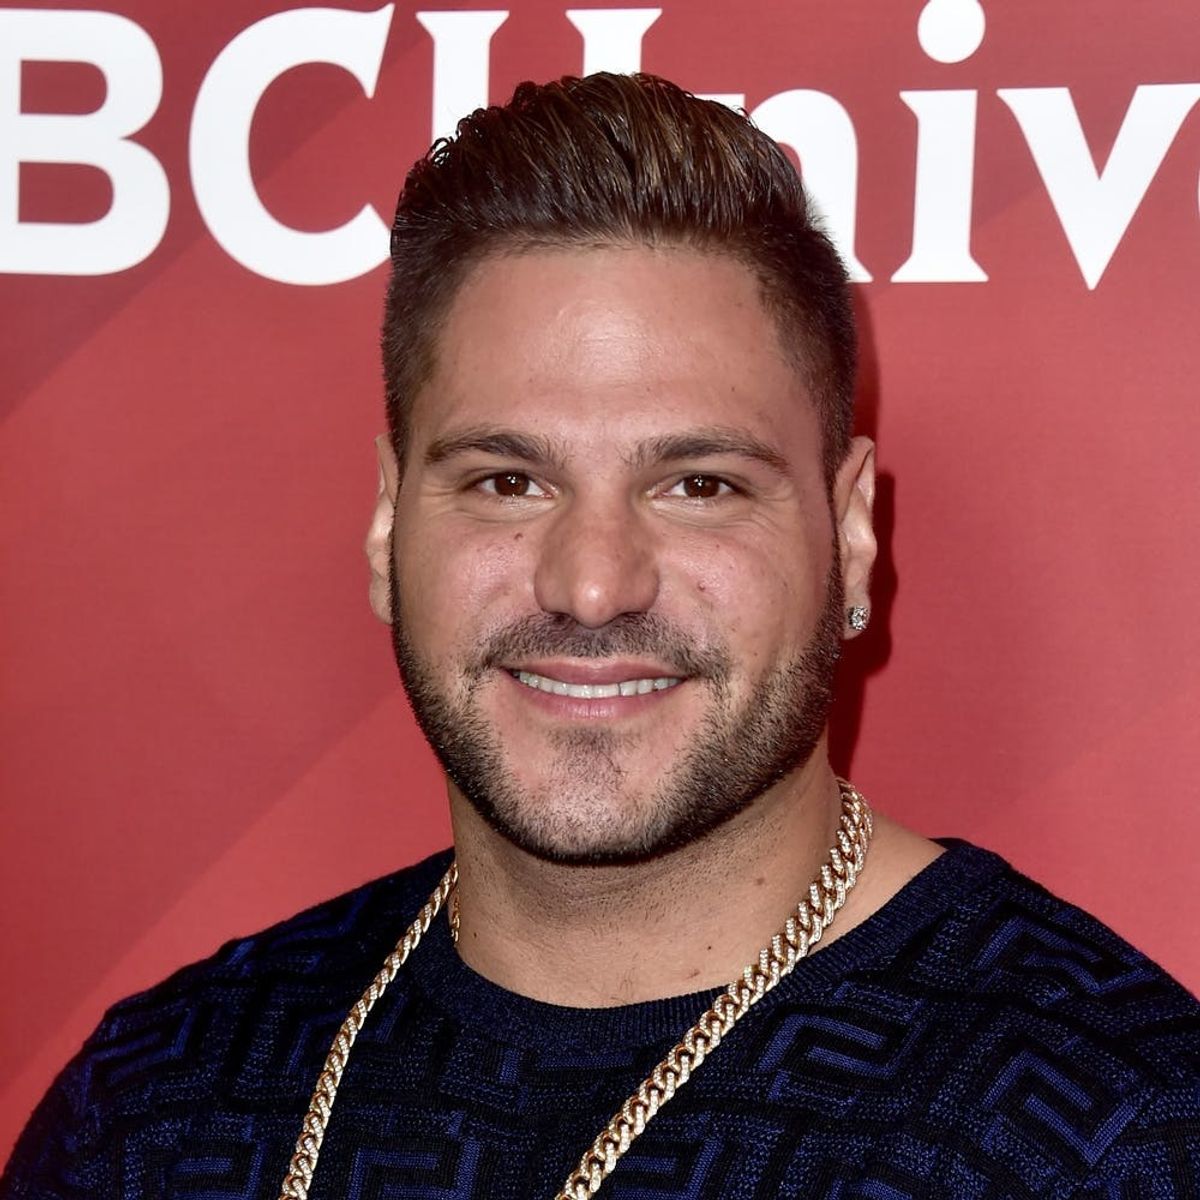 It’s Offiical: ‘Jersey Shore’s’ Ronnie Ortiz-Magro Is Gonna Be a Daddy!